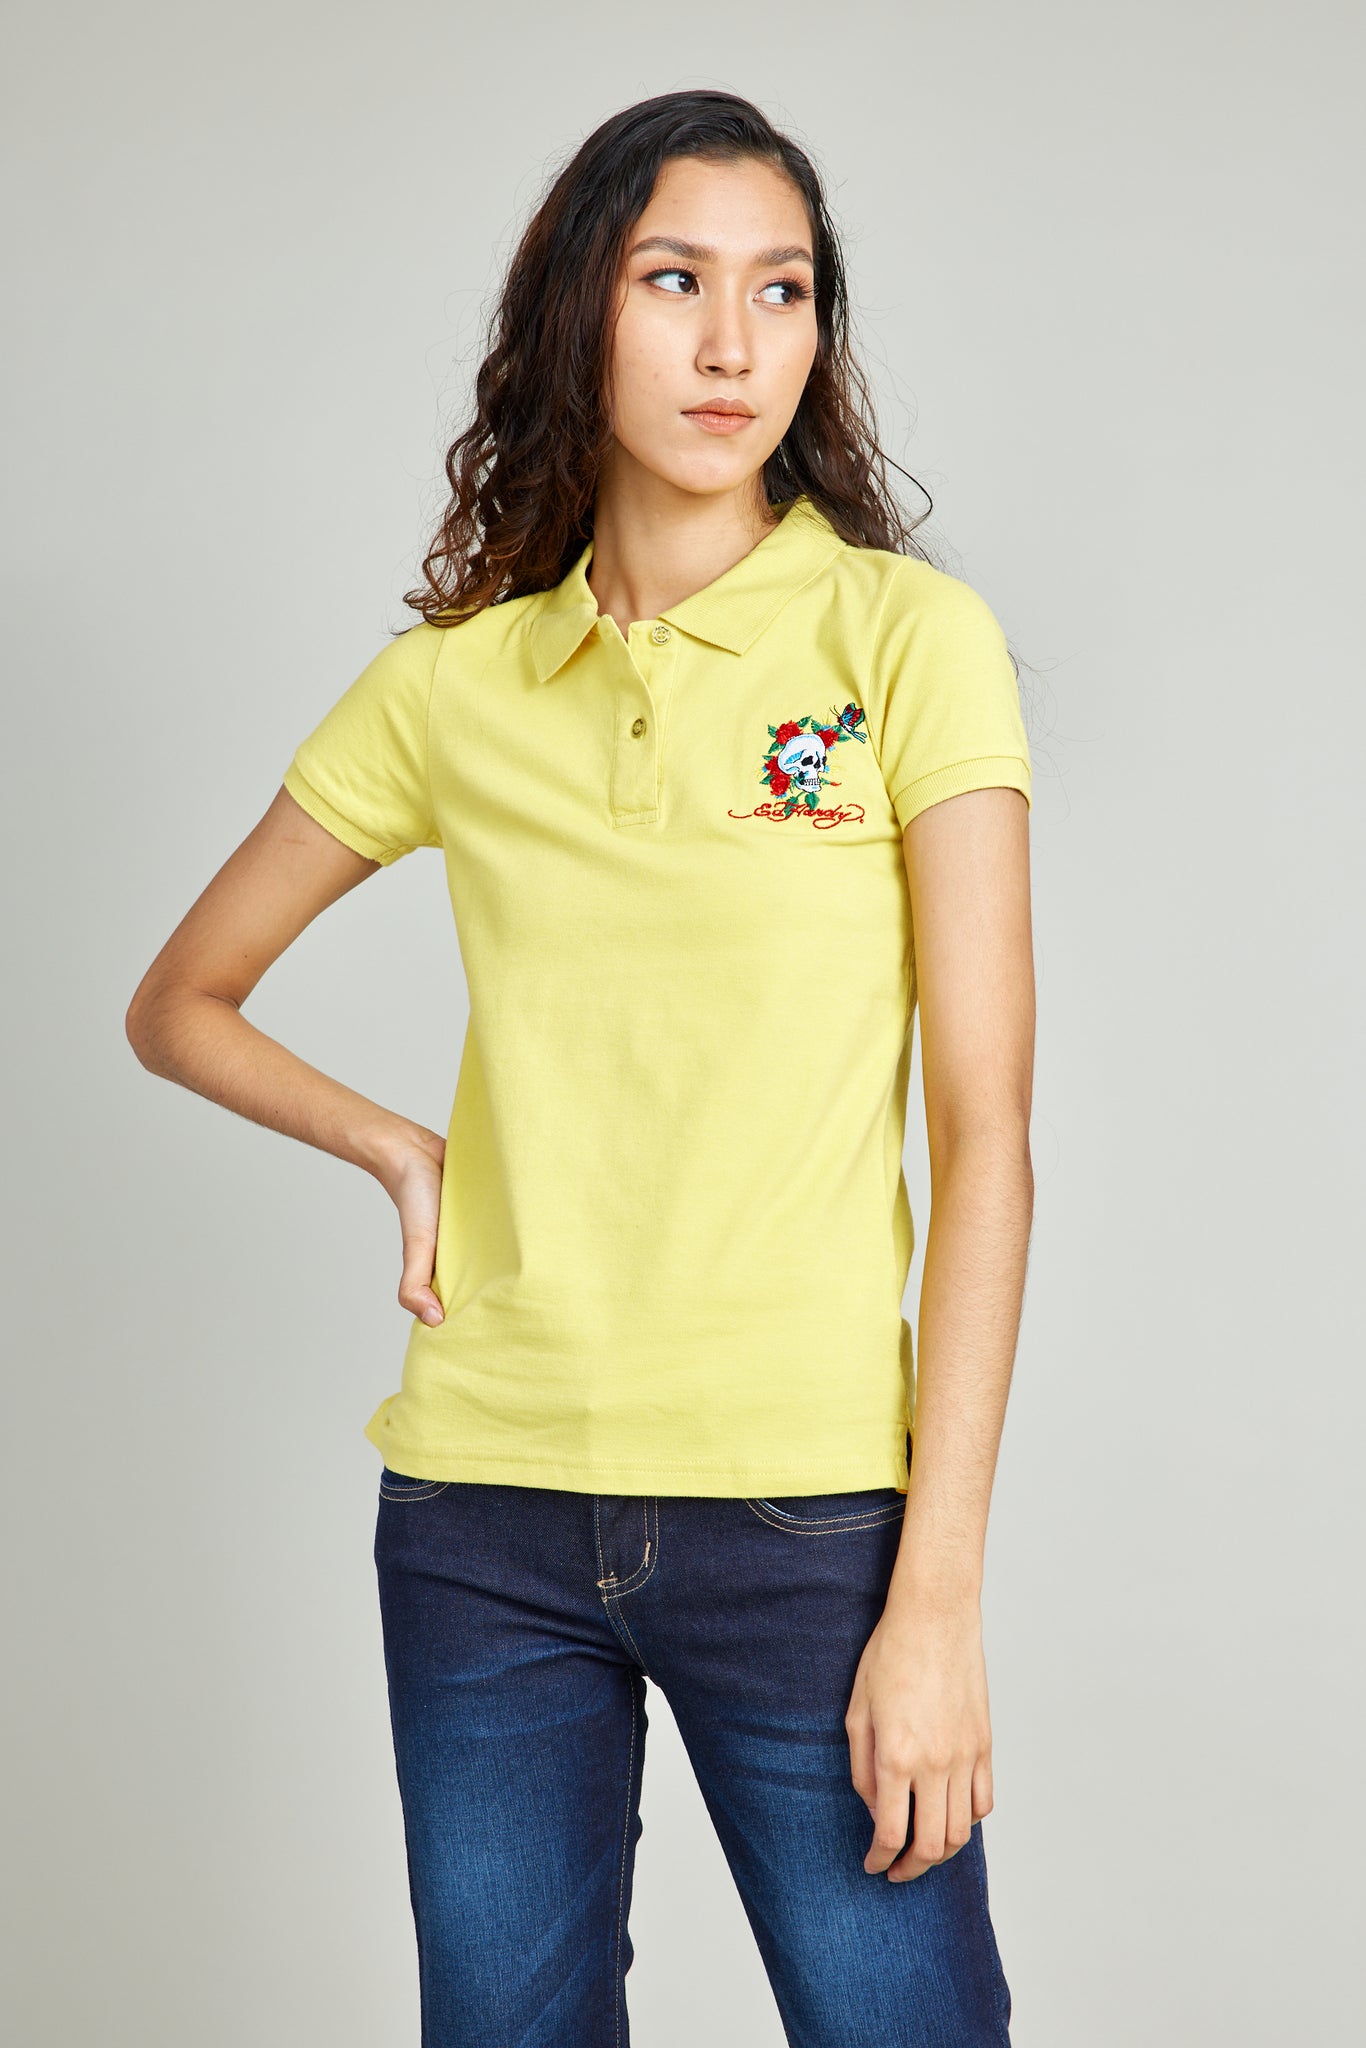 Mossimo shirts for women (Embroid)